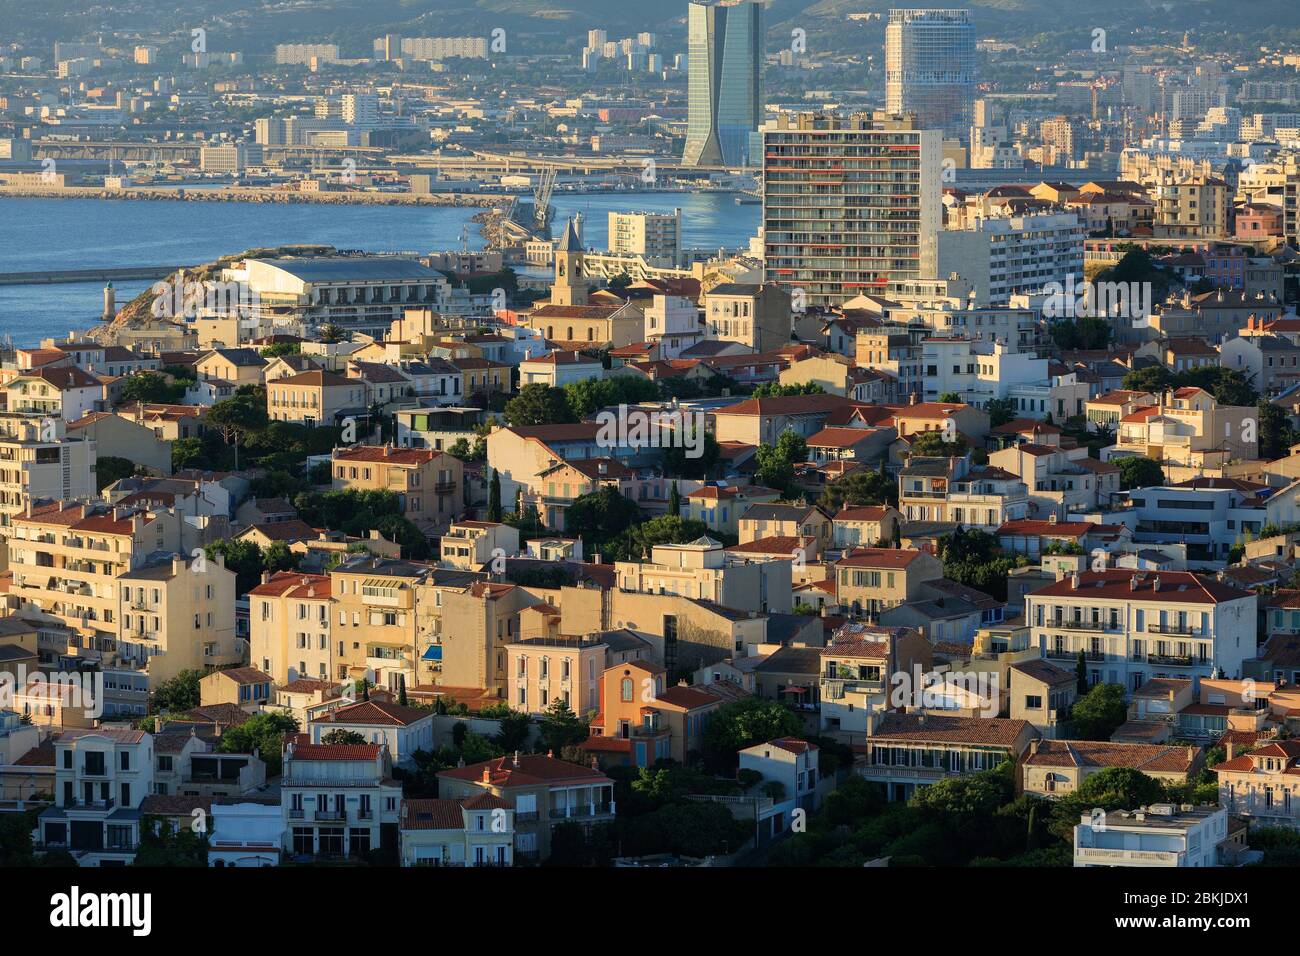 France, Bouches du Rhone, Marseille, 7th arrondissement, Endoume district, the CMA CGM tower and the La Marseillaise tower in the background (aerial view) Stock Photo